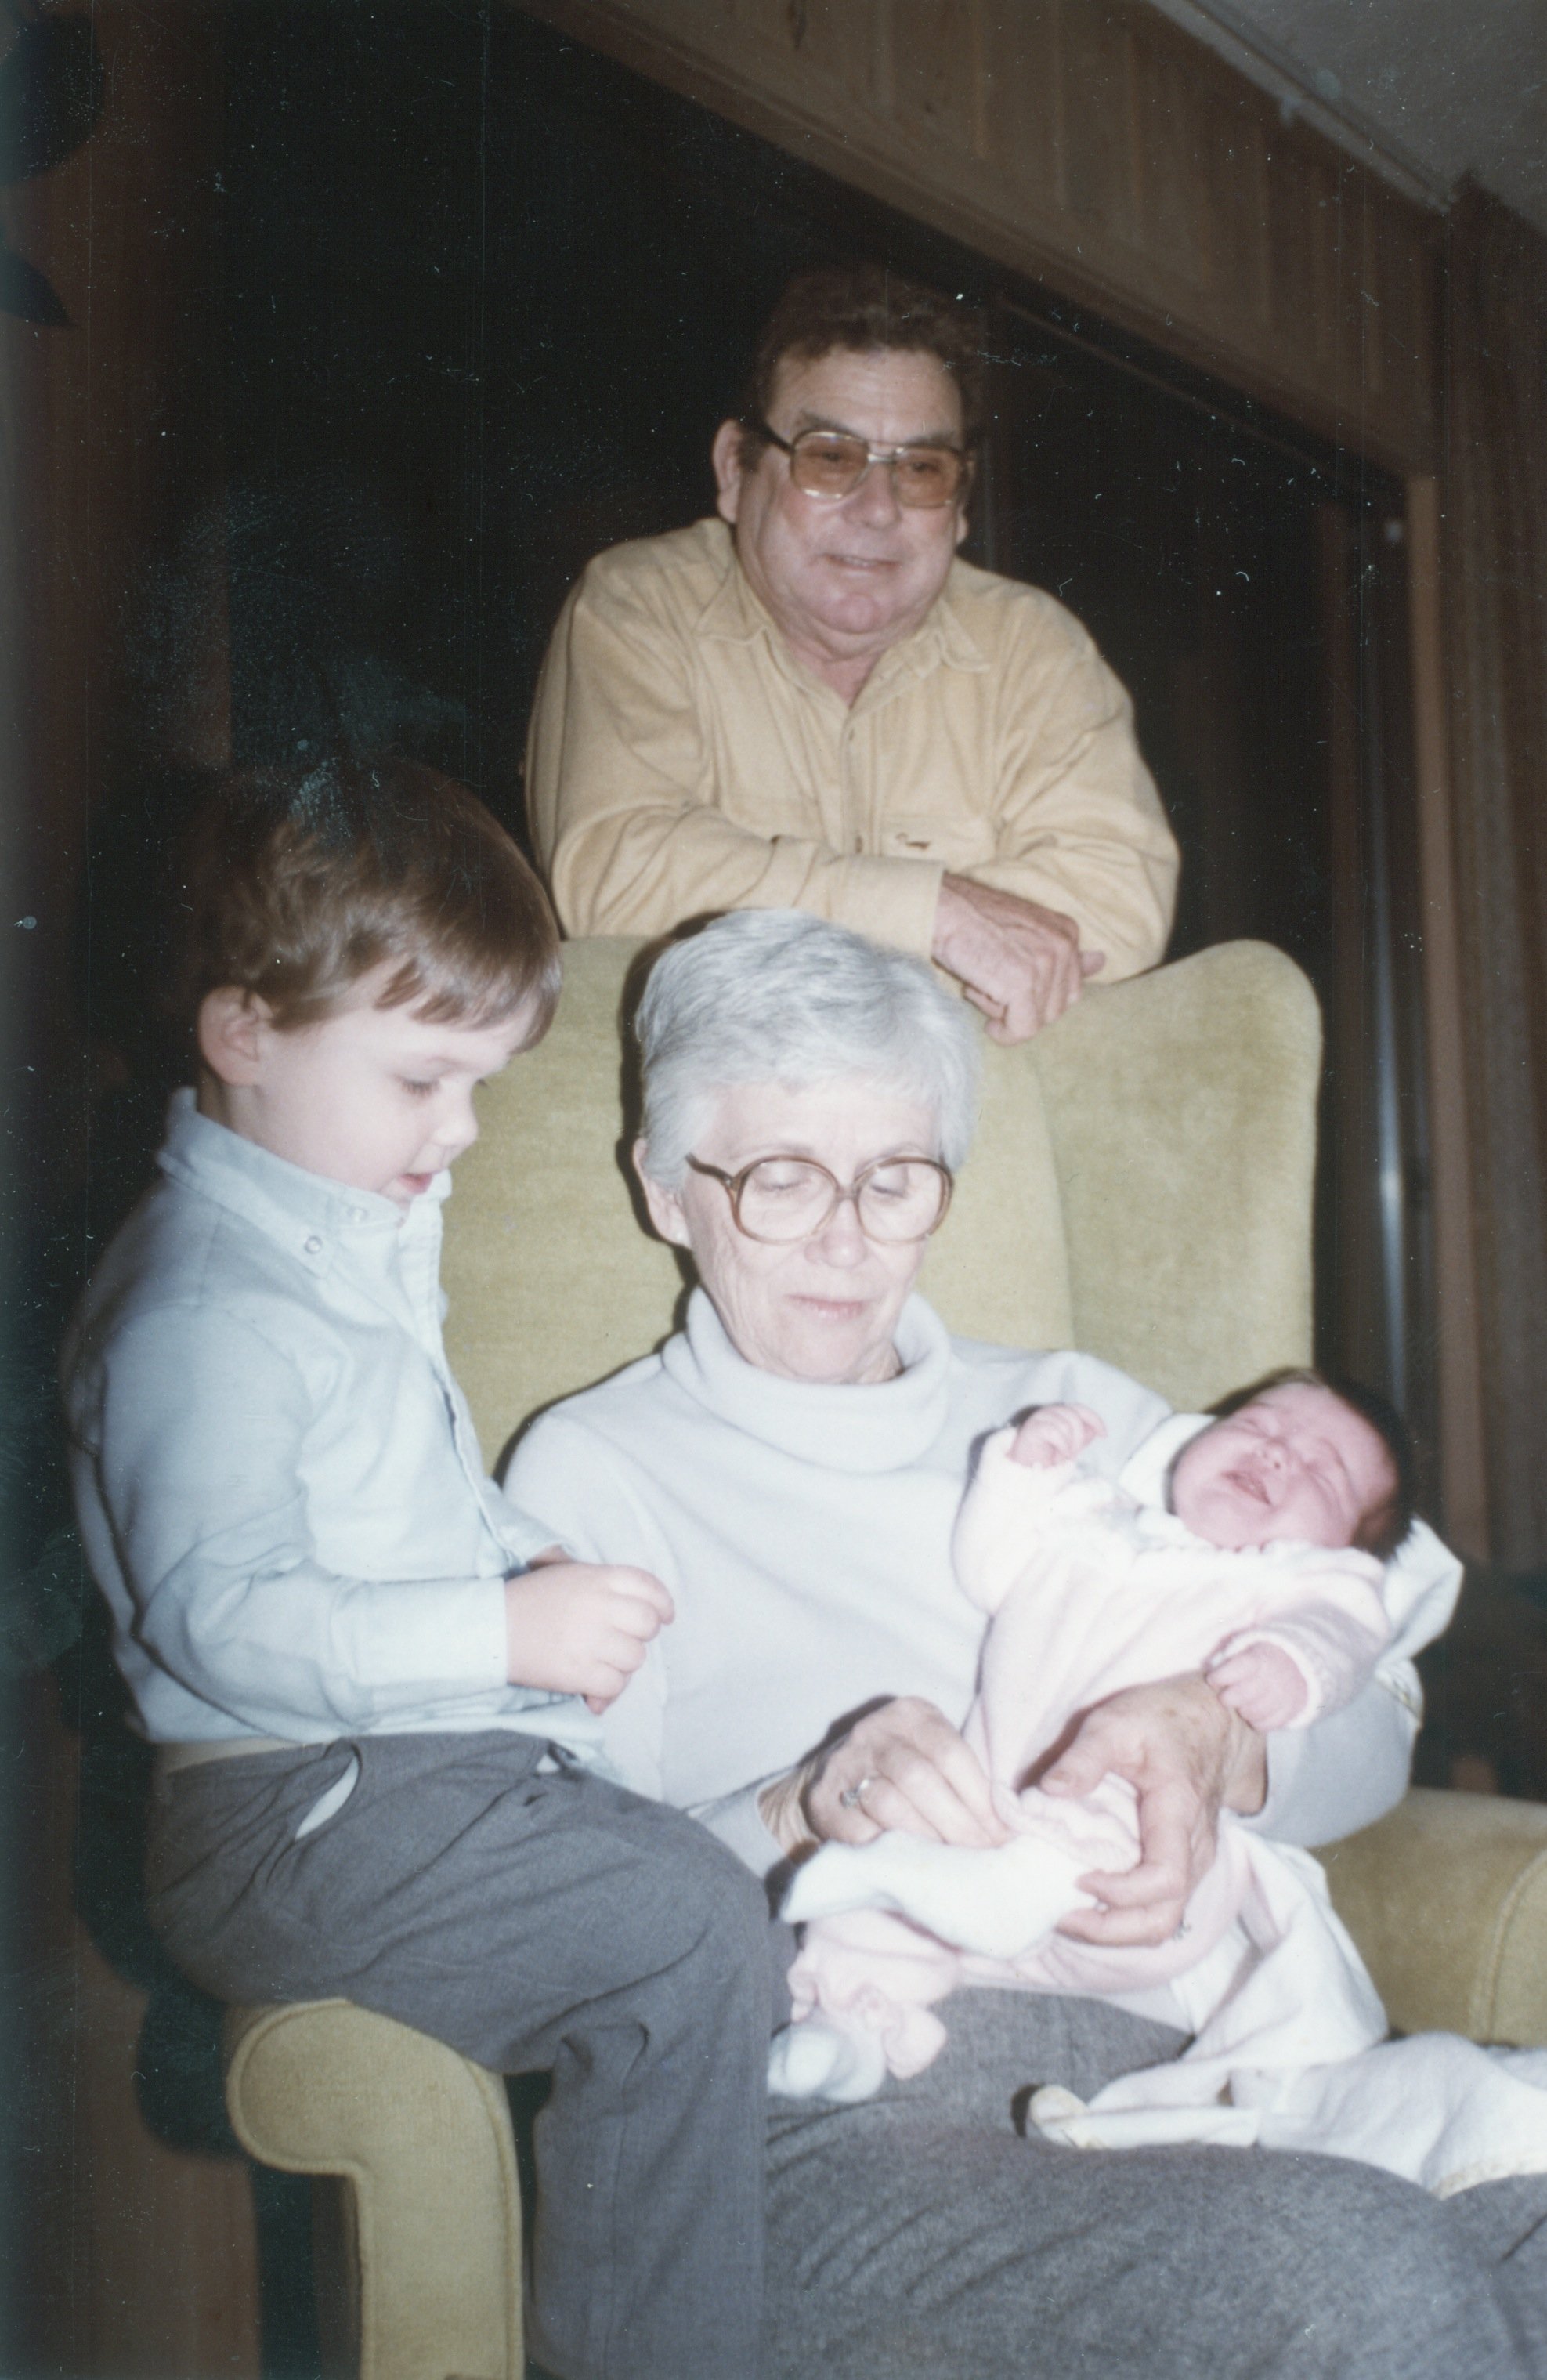 George and Doris Bedsworth with grandchildren Christian and Allison